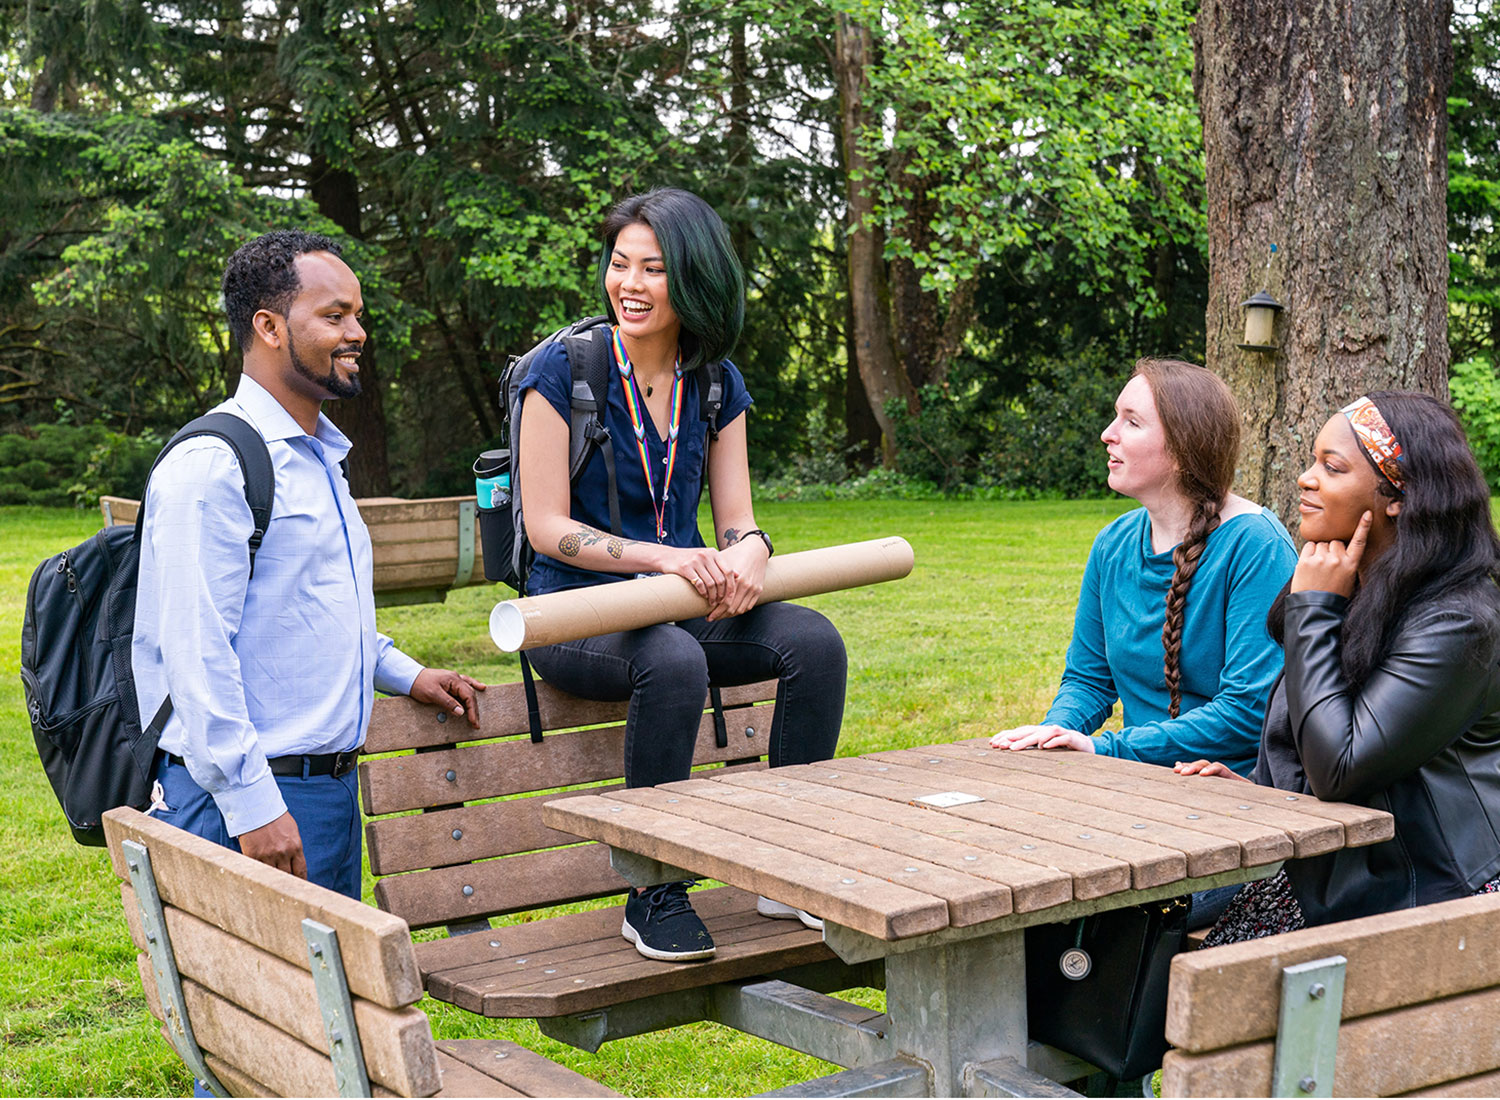 A young man wearing a backpack stands at a picnic table talking to three young women, one of whom is holding a cardboard poster tube.